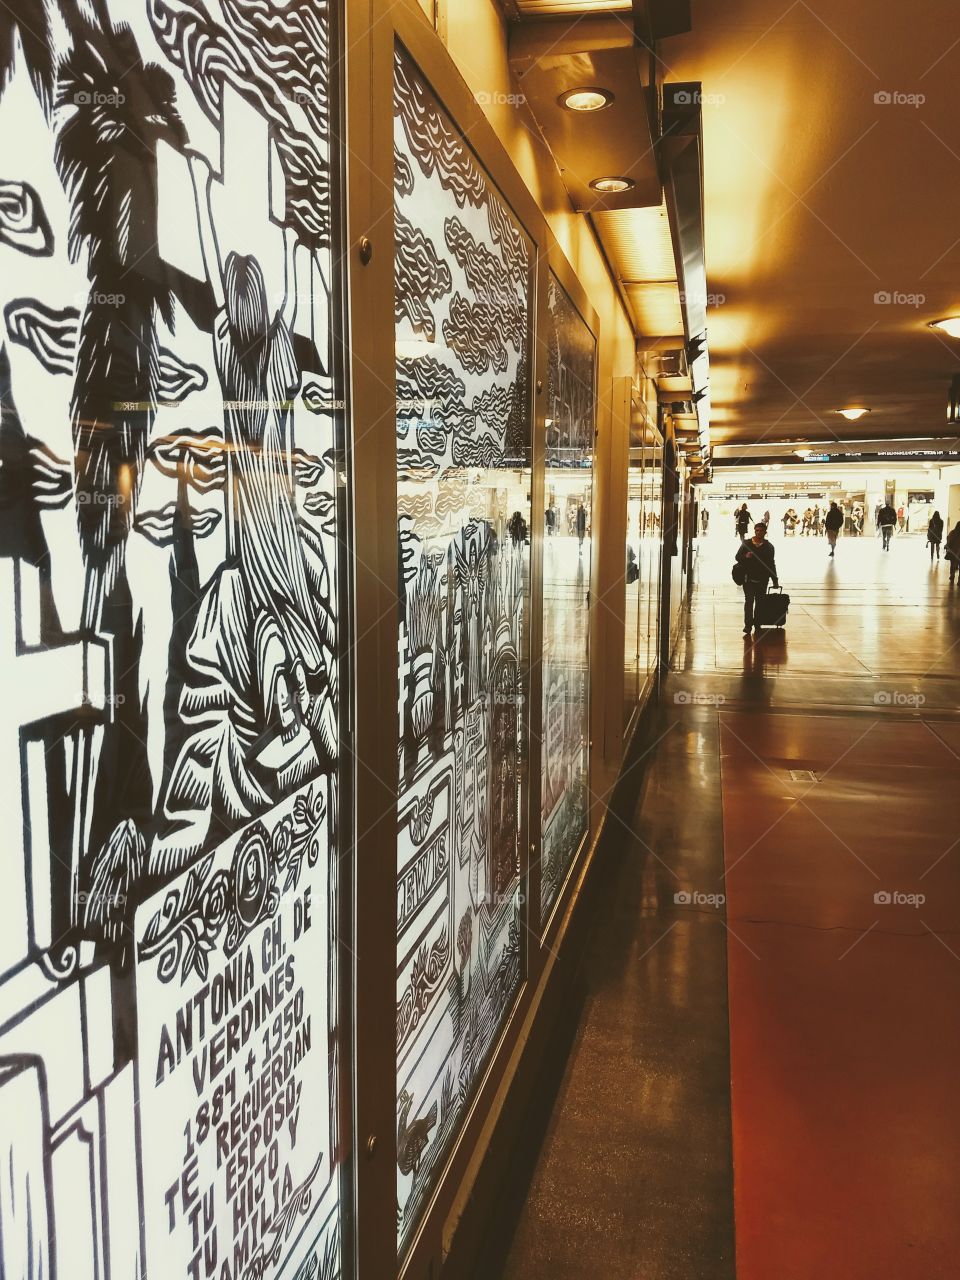 A mural reflects light while travelers move through the Los Angeles transit station.